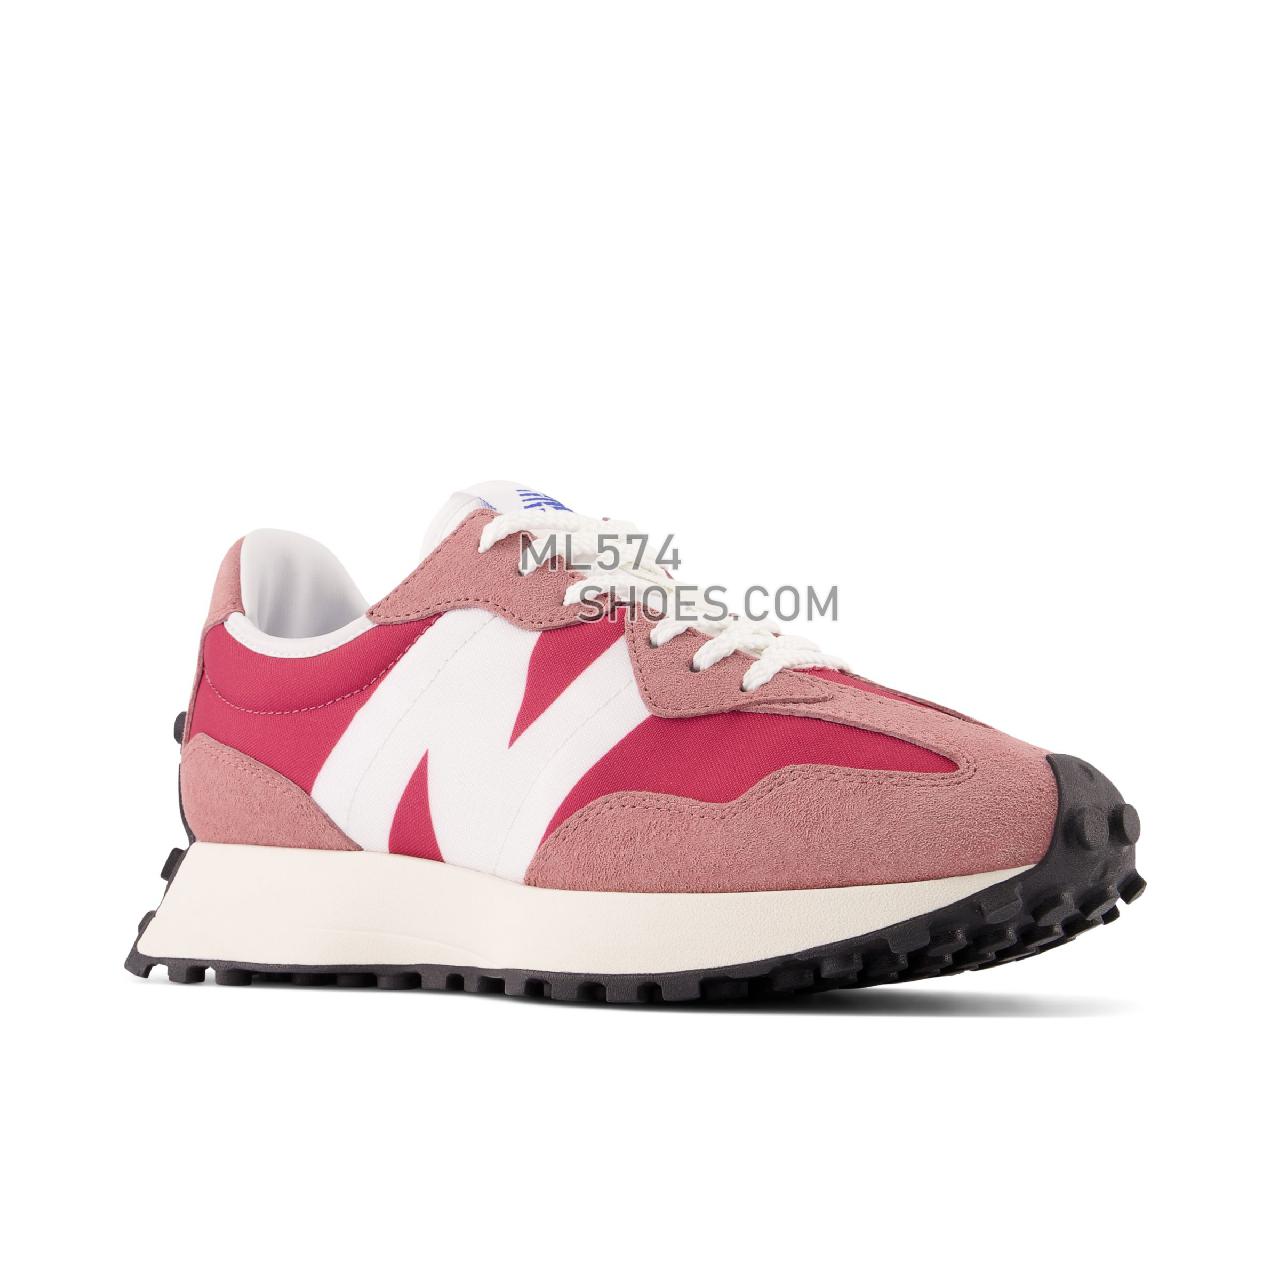 New Balance 327 - Women's Sport Style Sneakers - Washed Henna with Earth Red - WS327LJ1